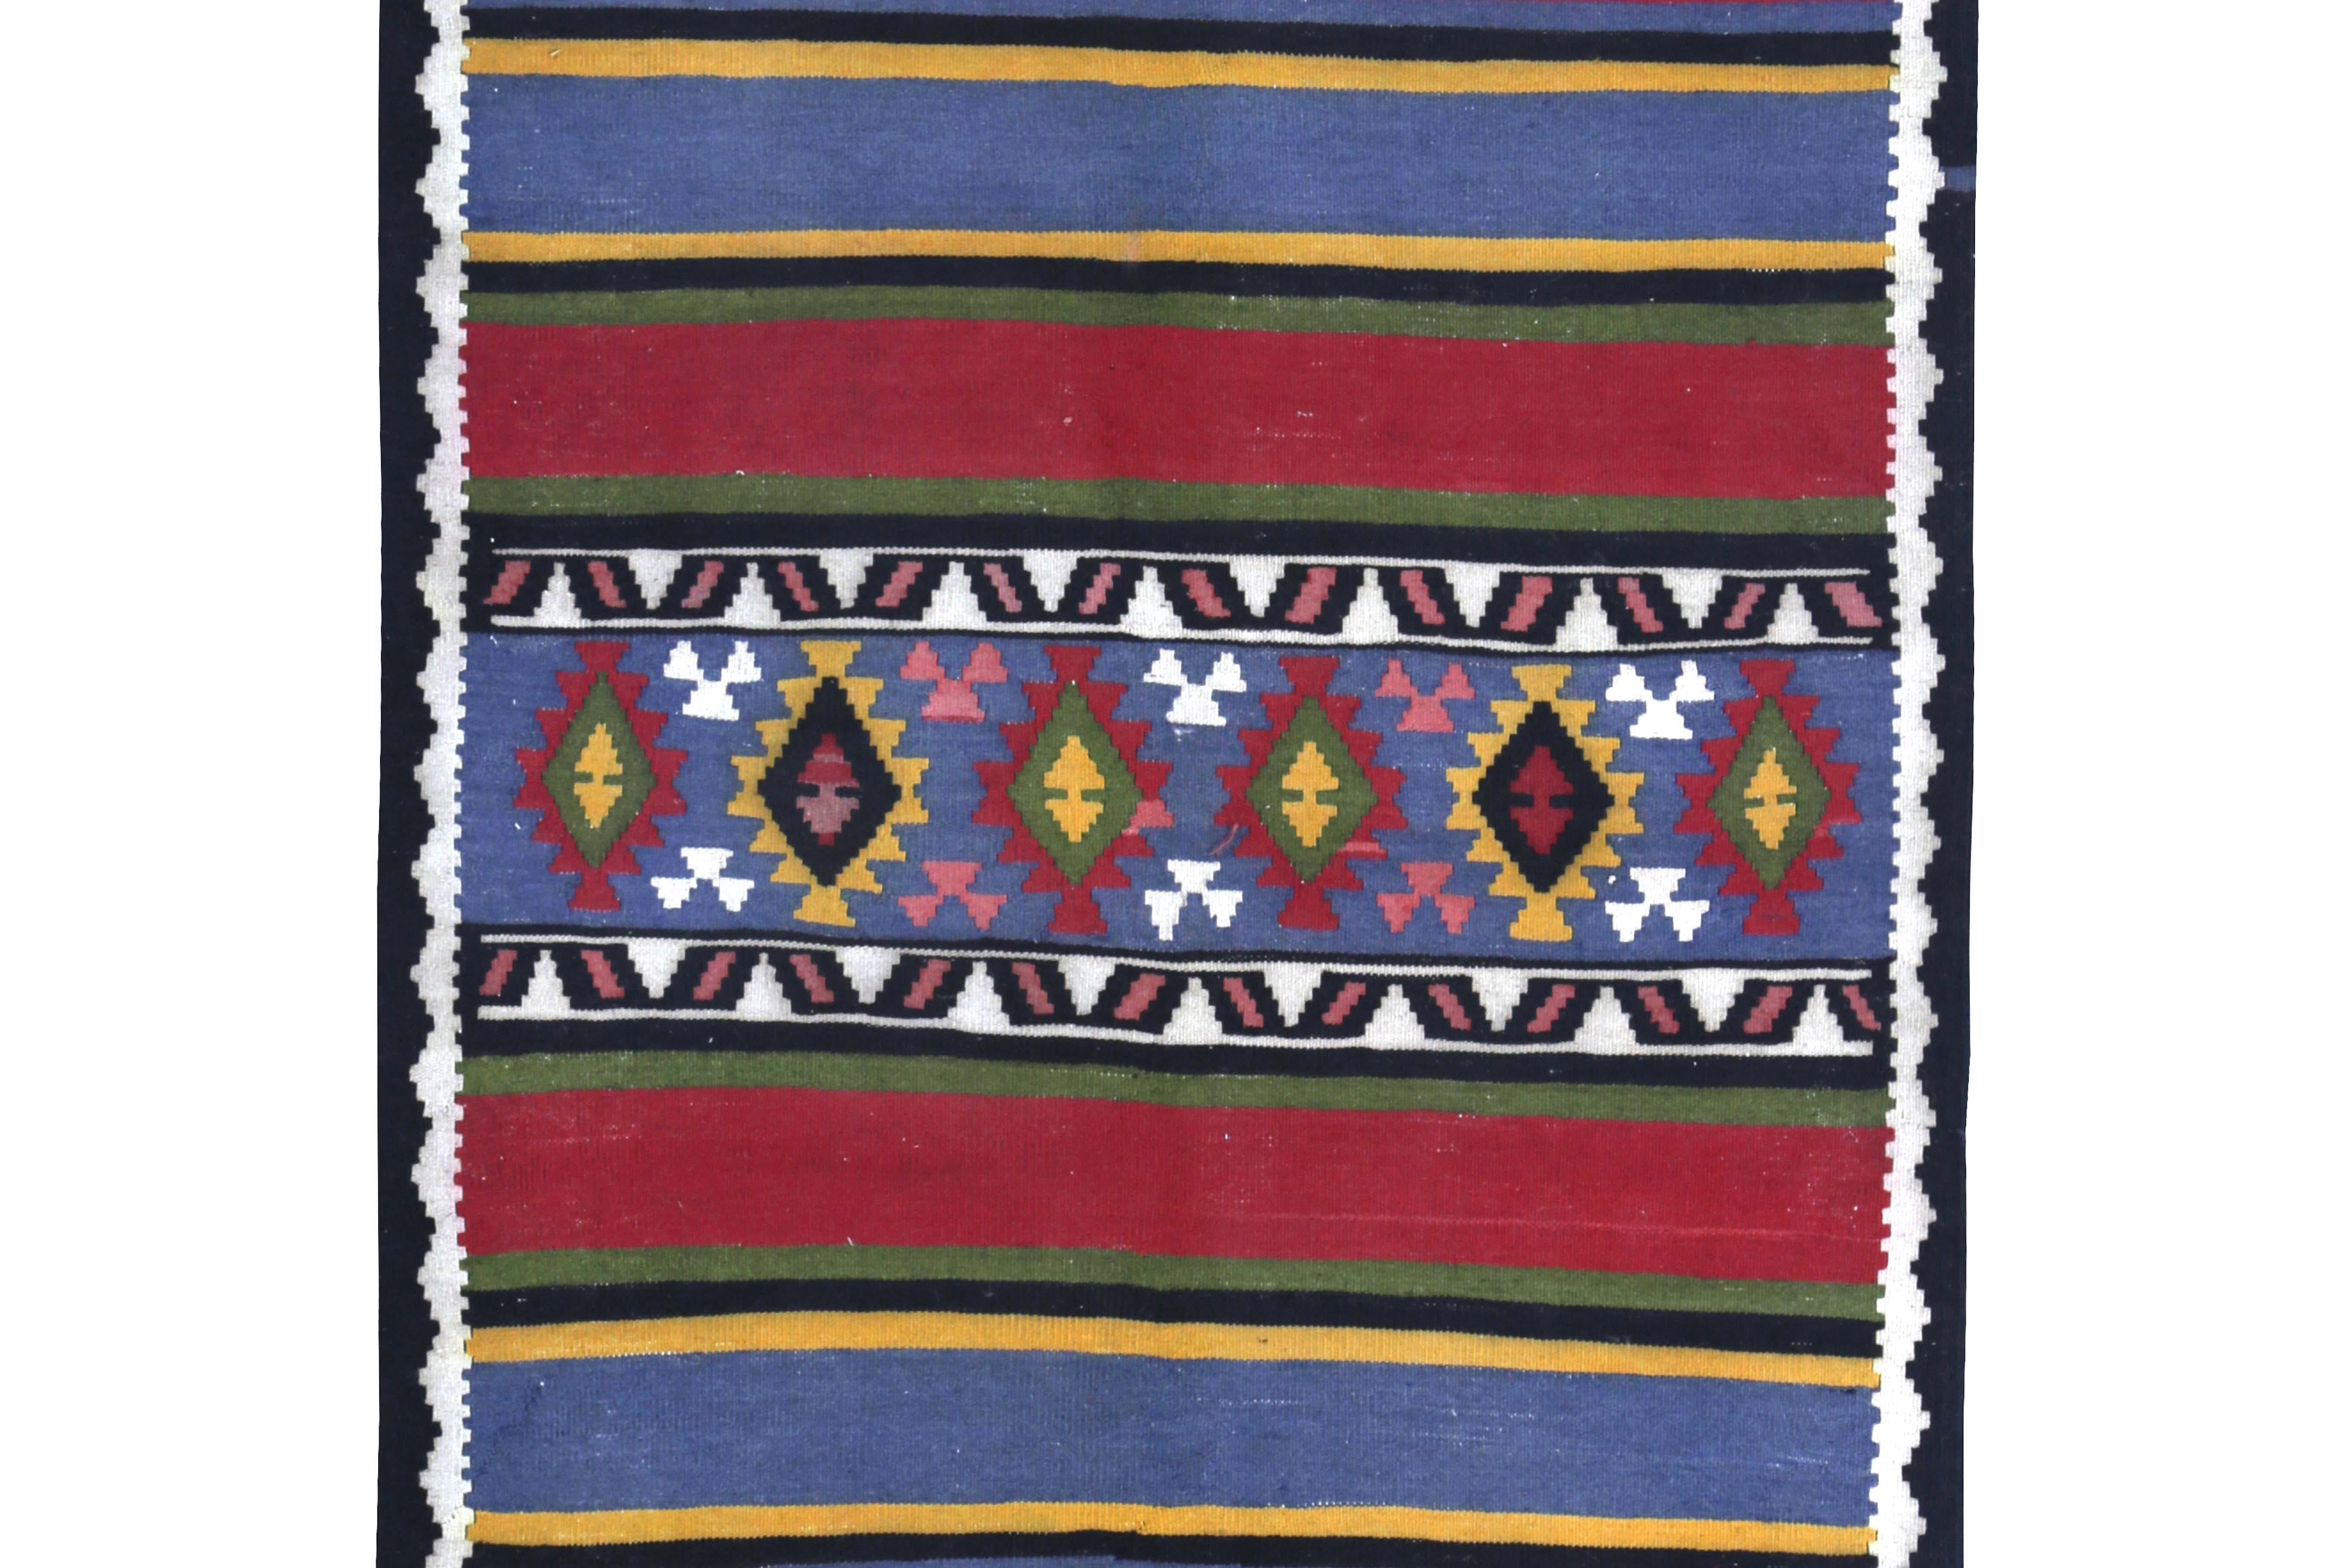 Hand-Woven Modern Turkish Kilim Runner Rug in Red, Green & Blue Stripes with Tribal Design For Sale